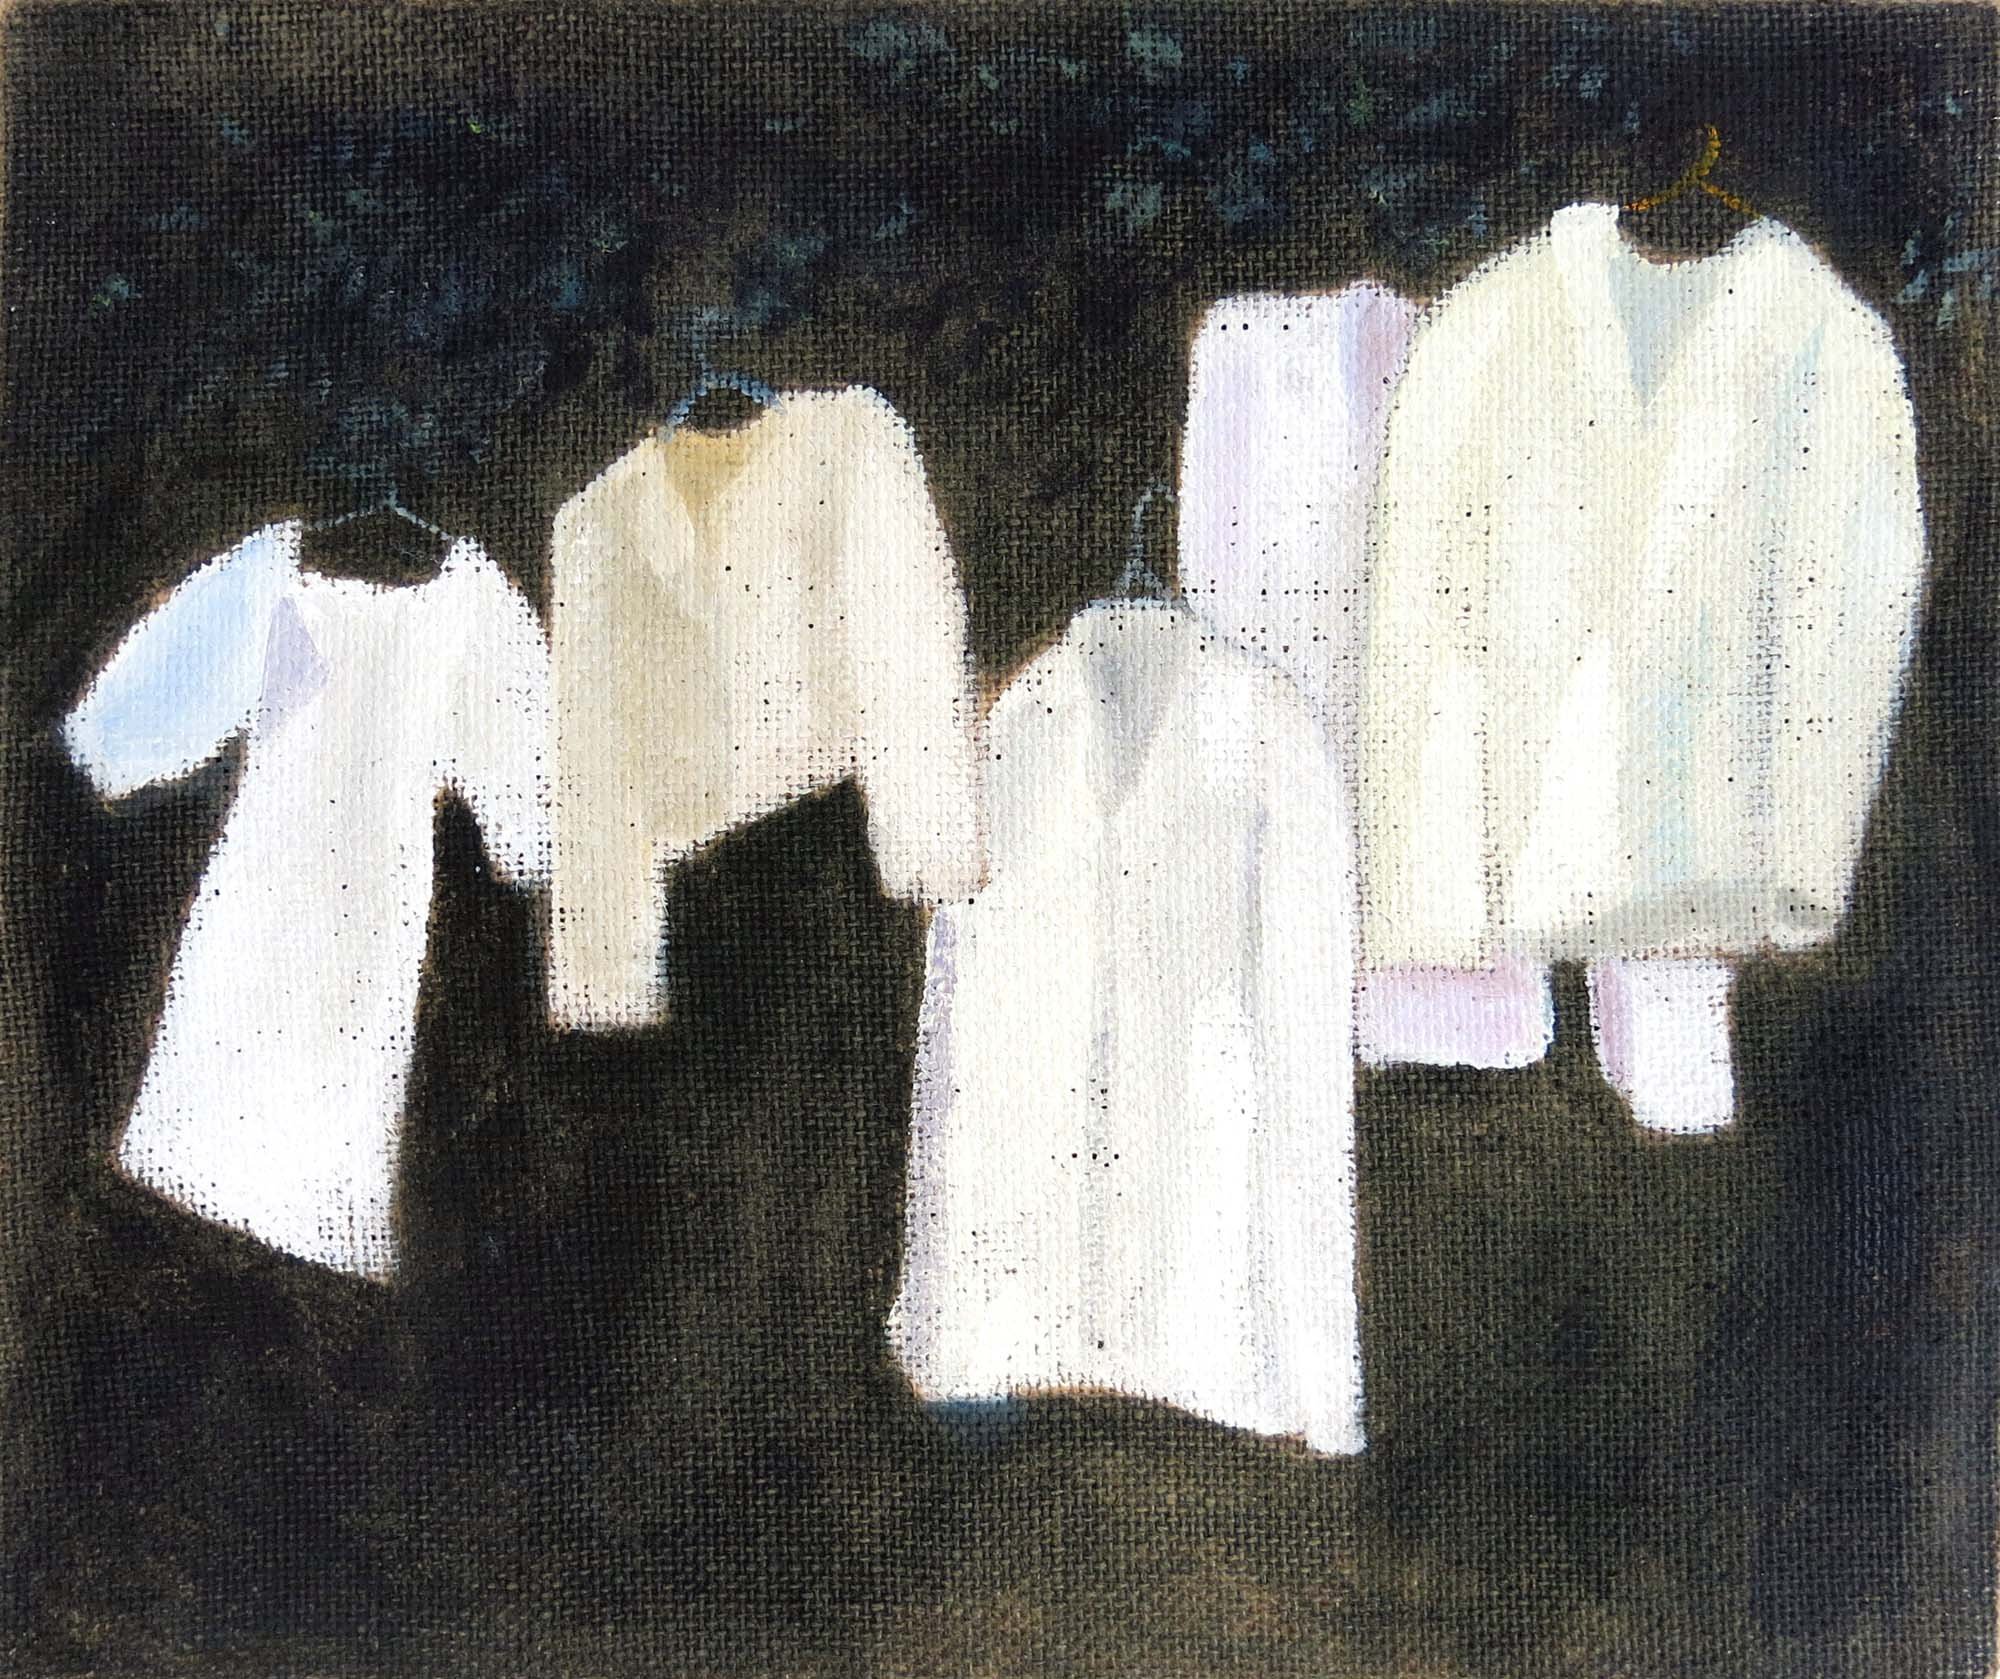   Vintage Clothes in the  Trees    2022, oil on jute, 25 x 30cm  